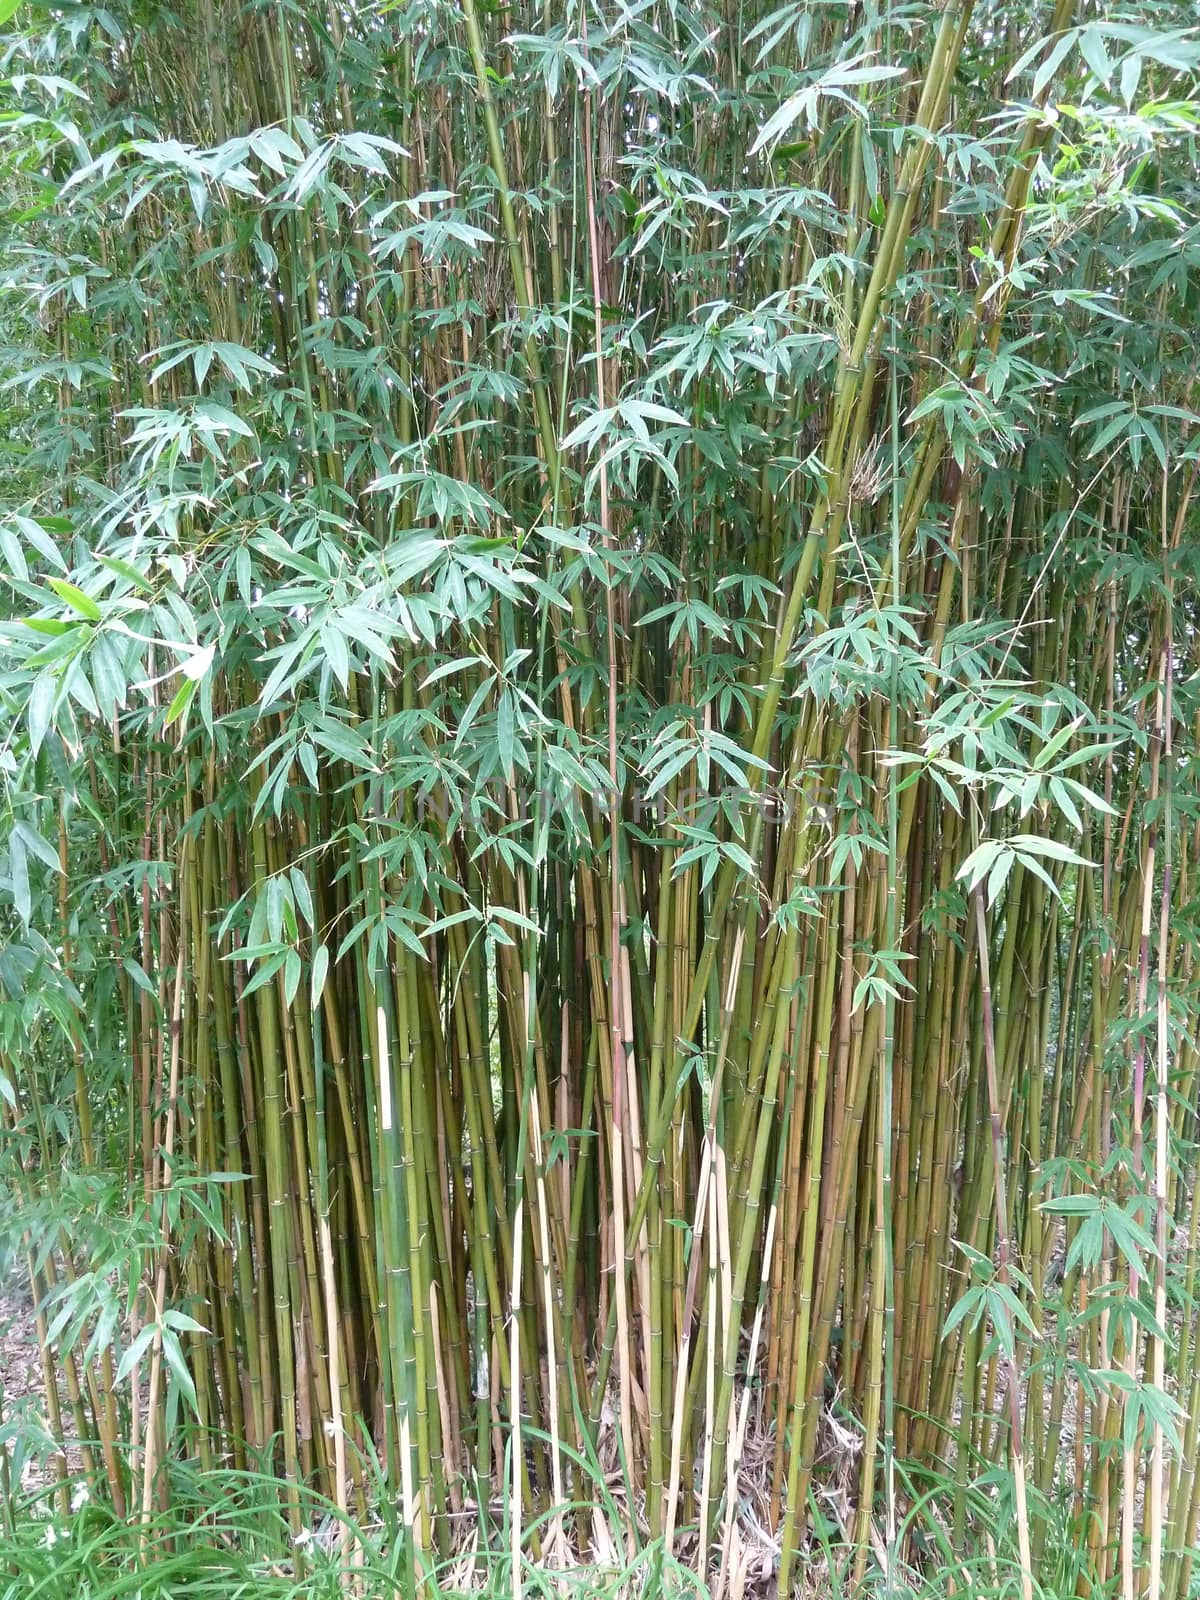 Bright green bamboo leaves with brown and green stalks